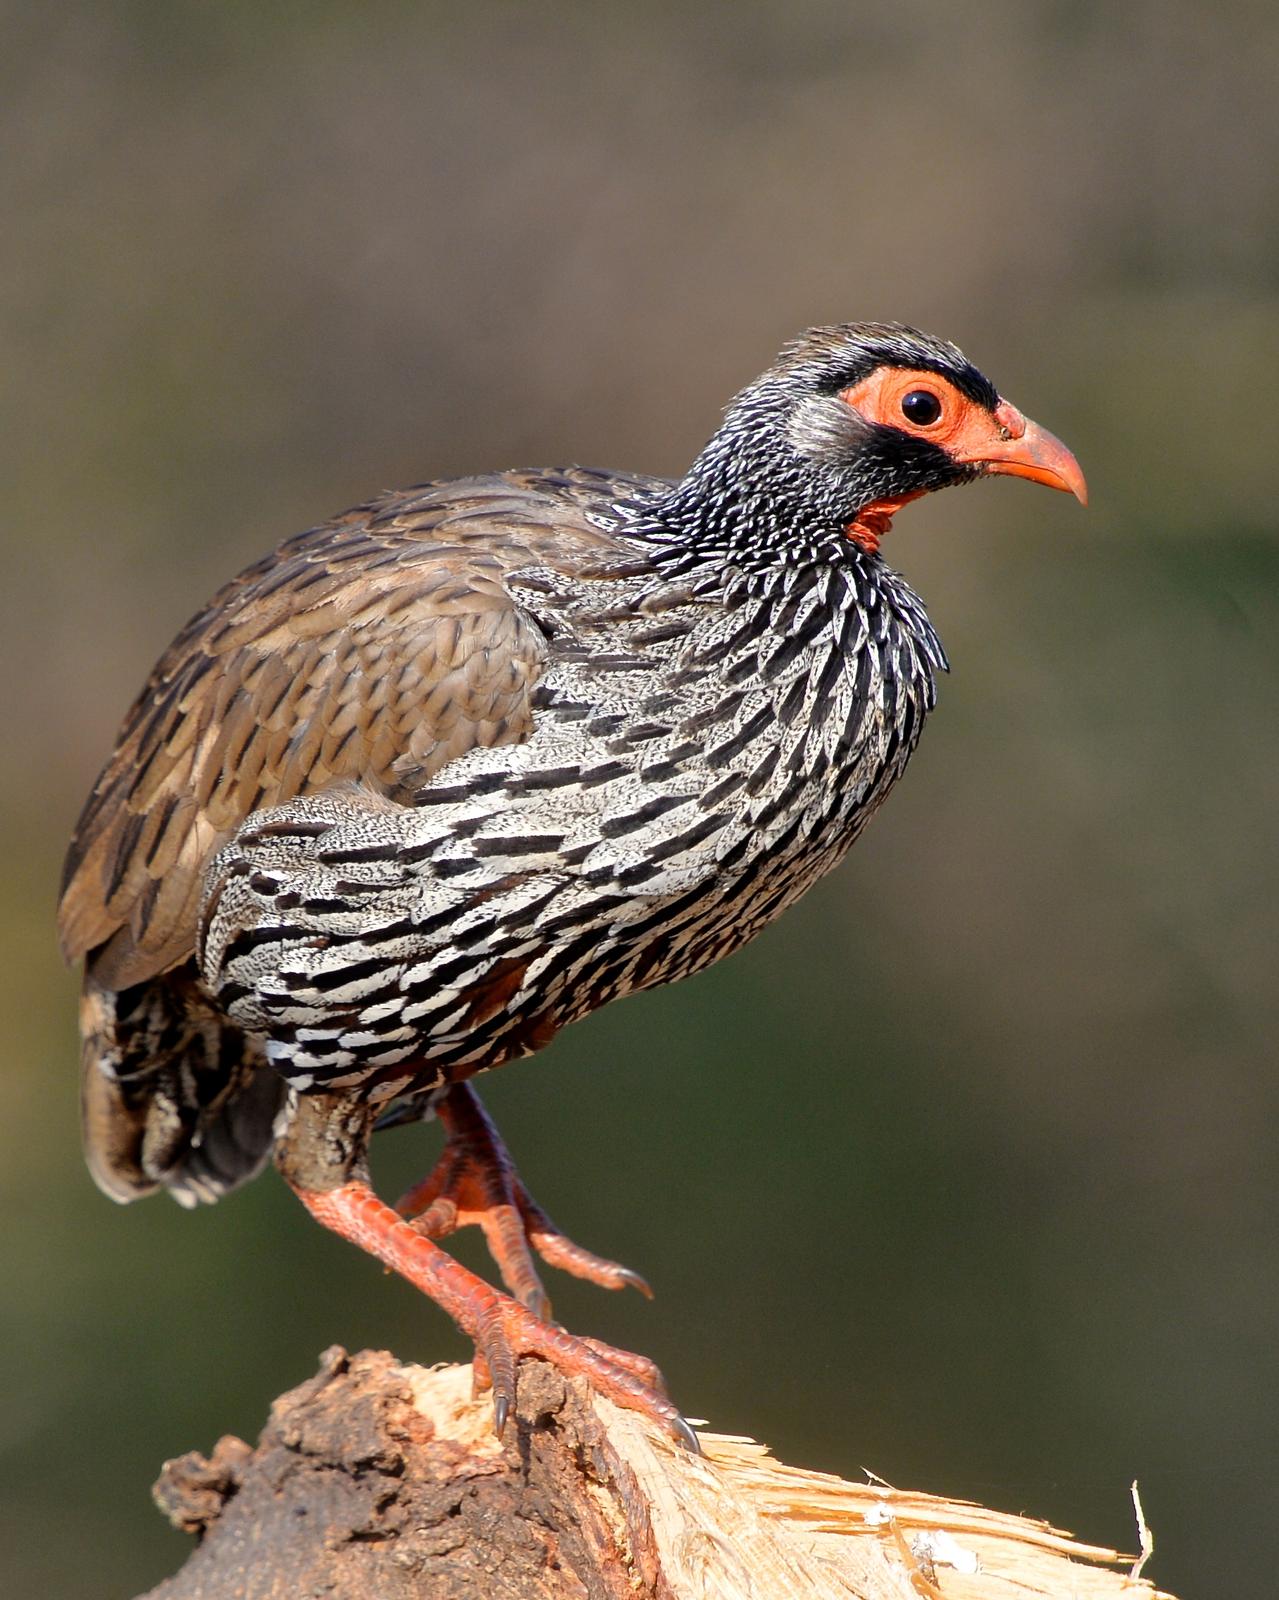 Red-necked Francolin Photo by Gerald Friesen. 